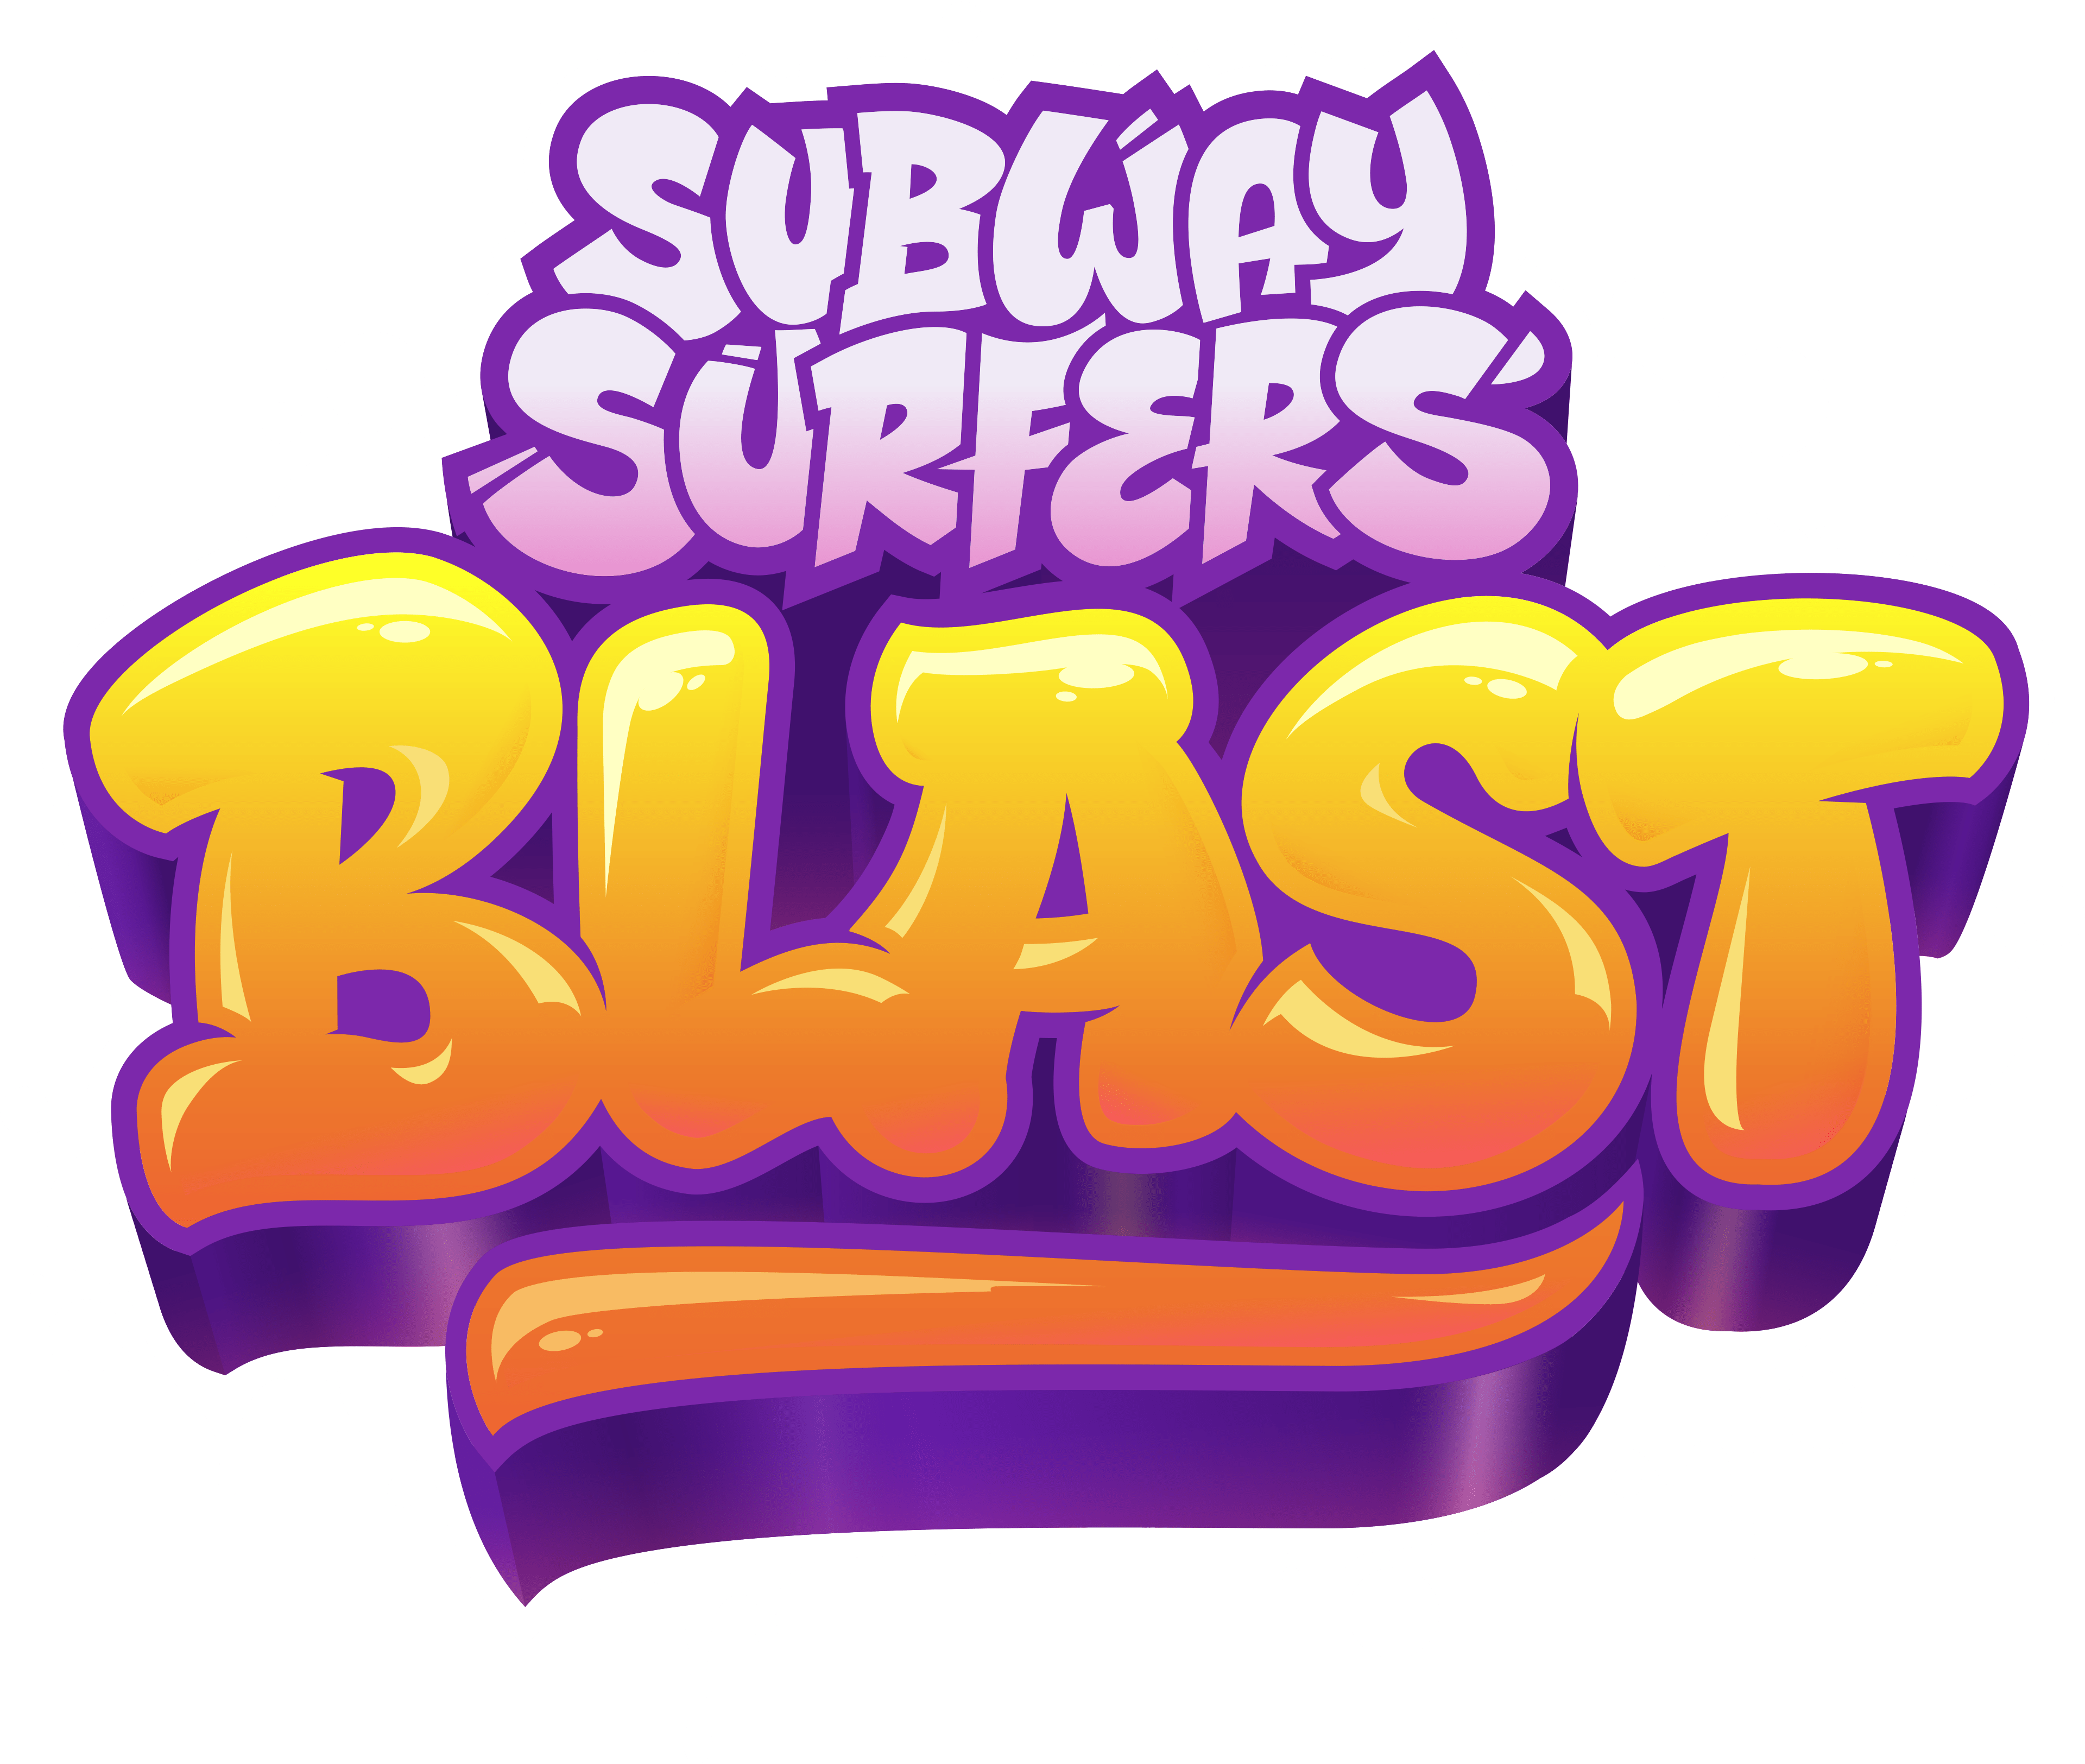 Subway Surfers Blast Is Now Available on Android & iOS